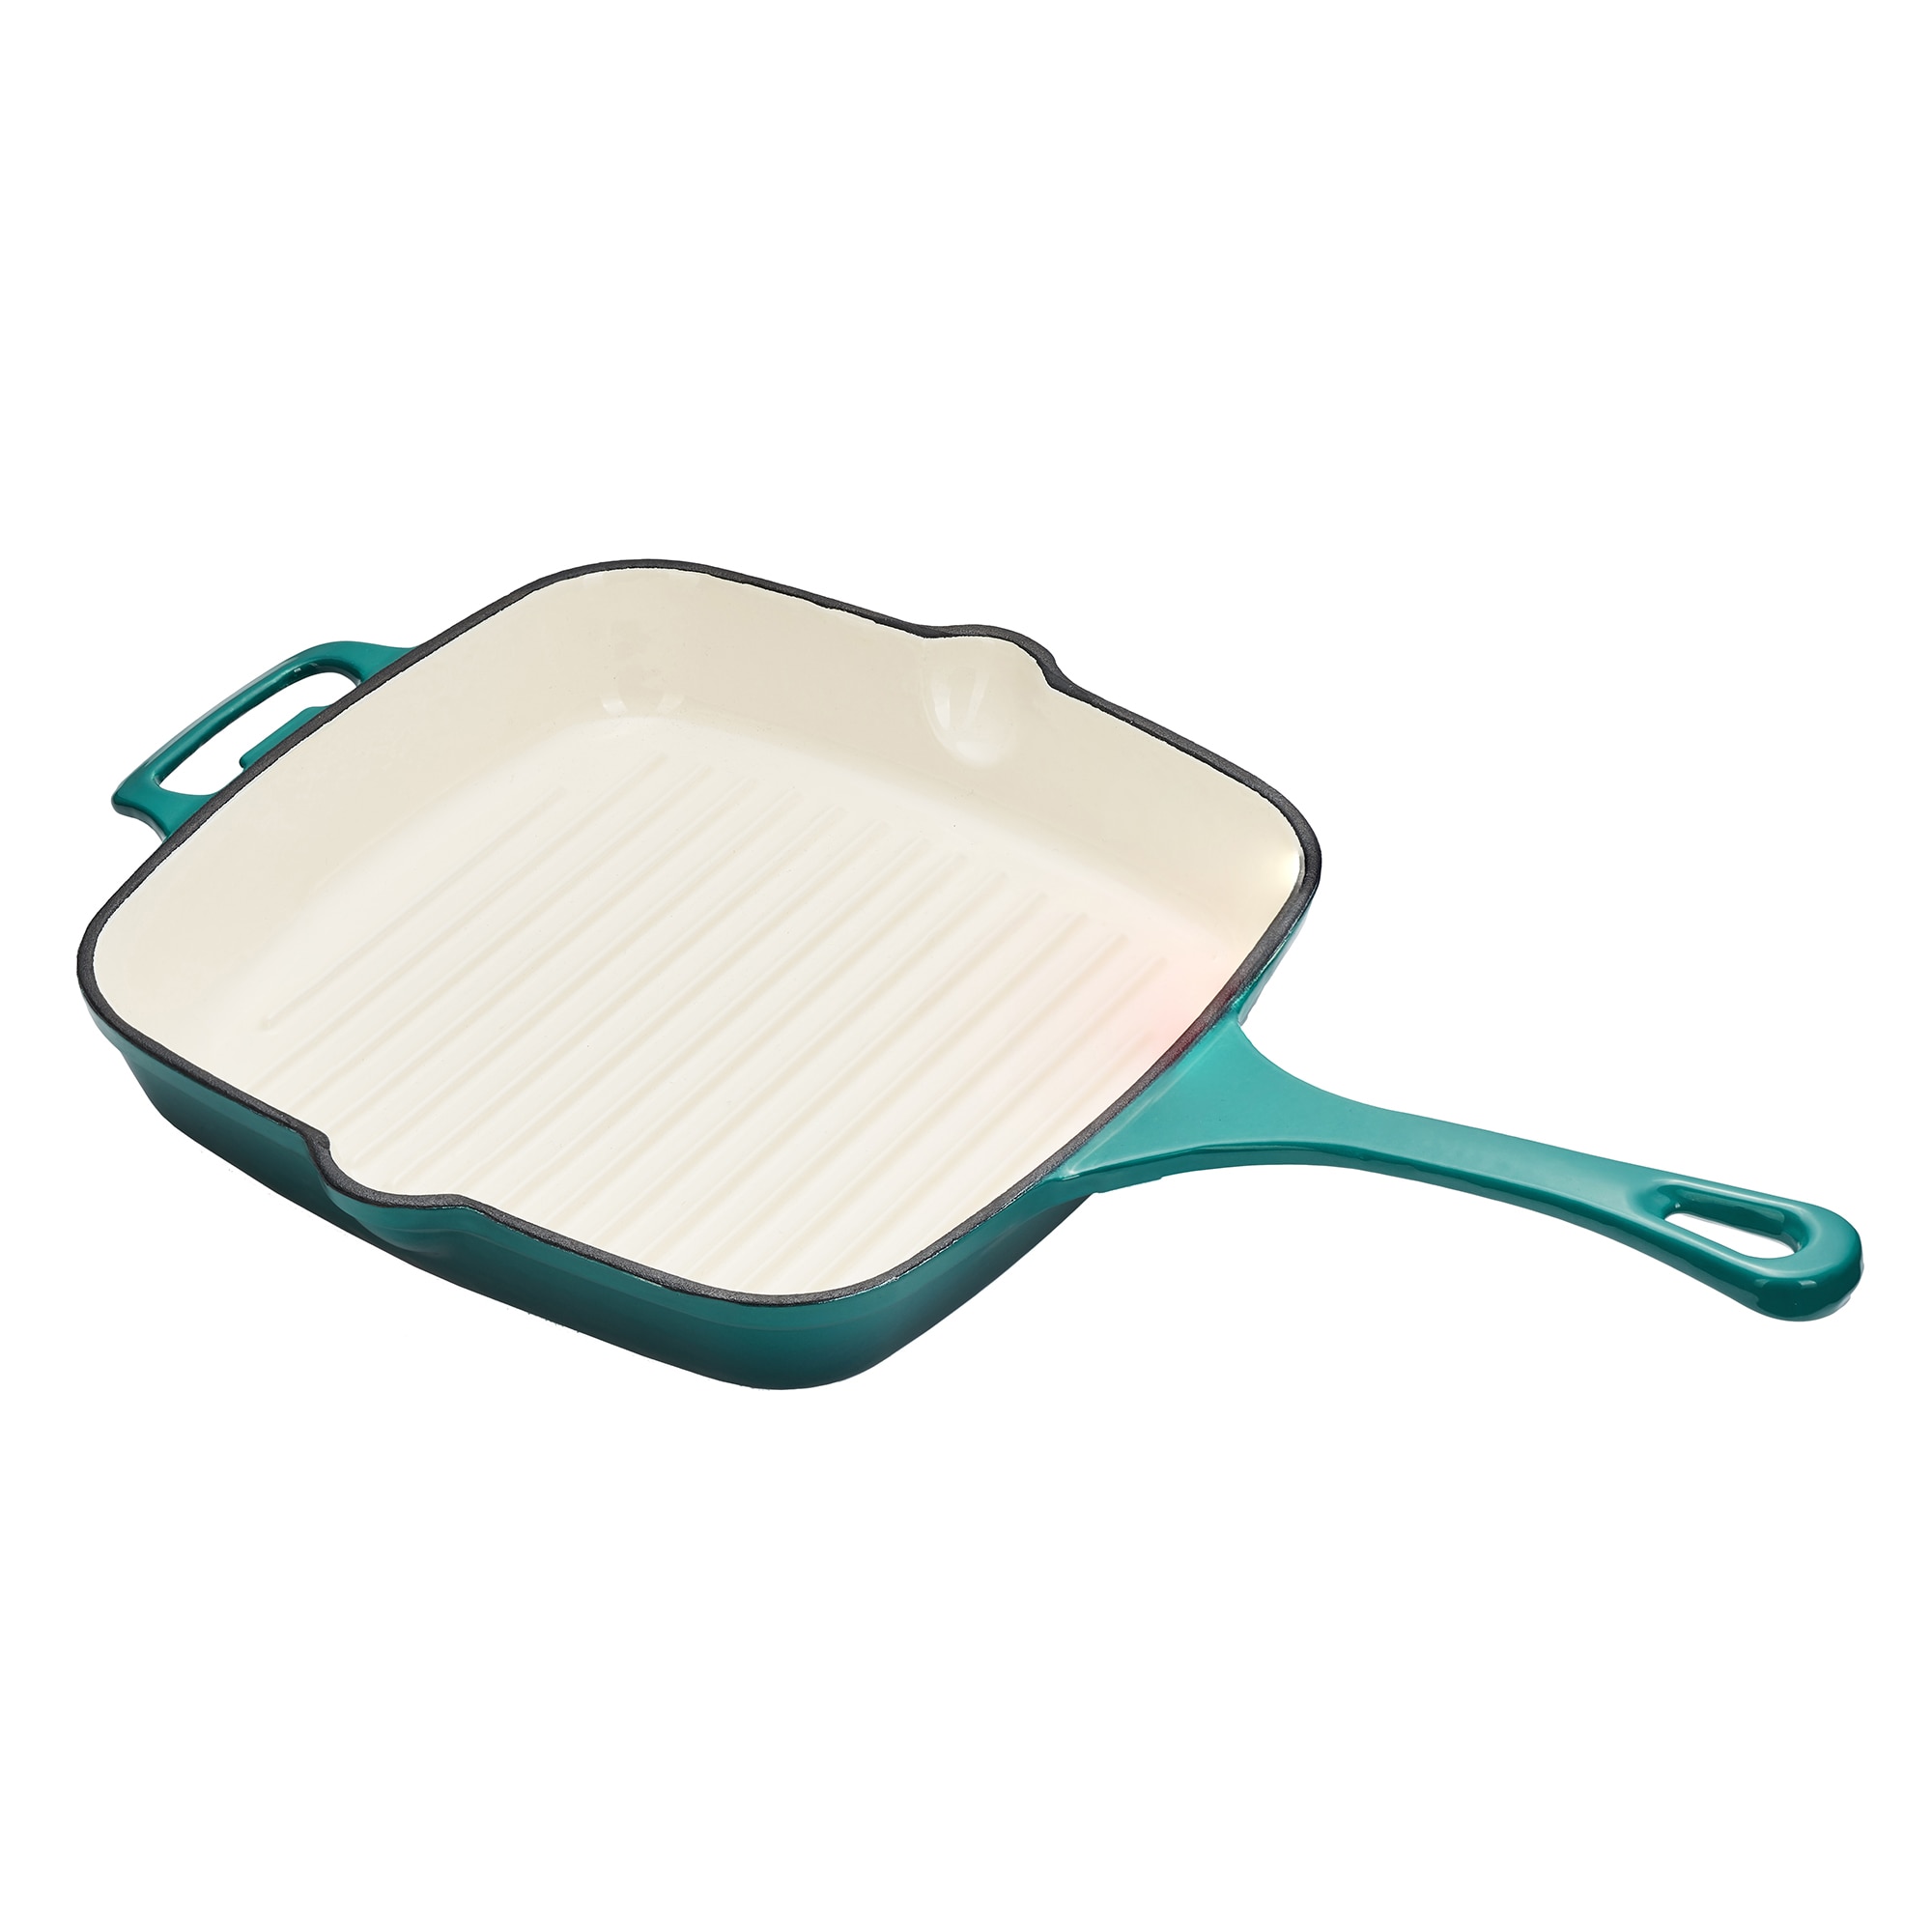 Tigaie grill fonta emailata Cooking by Heinner, Taste of Home by Chef Bontea, inductie, 26.5 x 26.5 x 5 cm - eMAG.ro